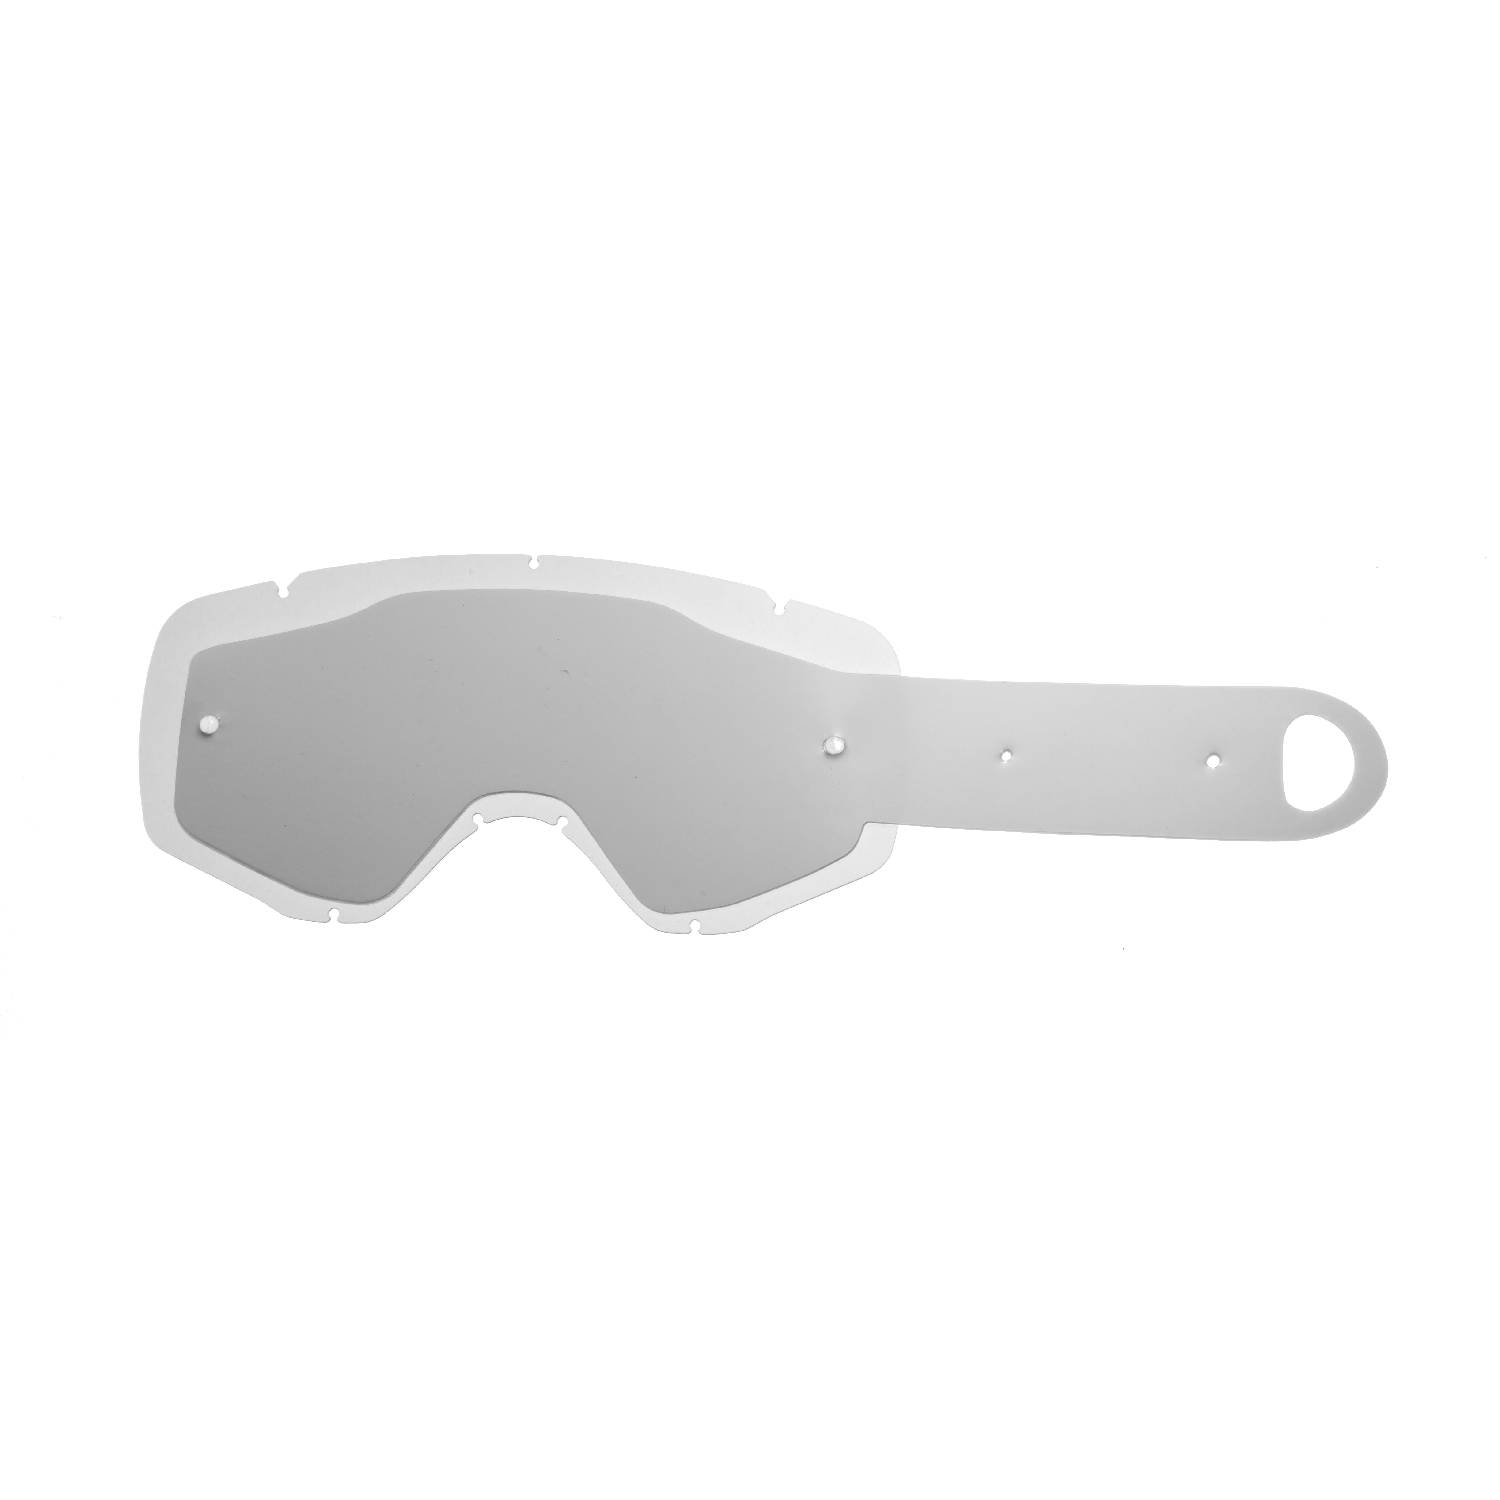 combo lenses with clear lenses with 10 tear off compatible for Ethen Zerosei GP/ Basic / Evolution/ Mud Mask goggle